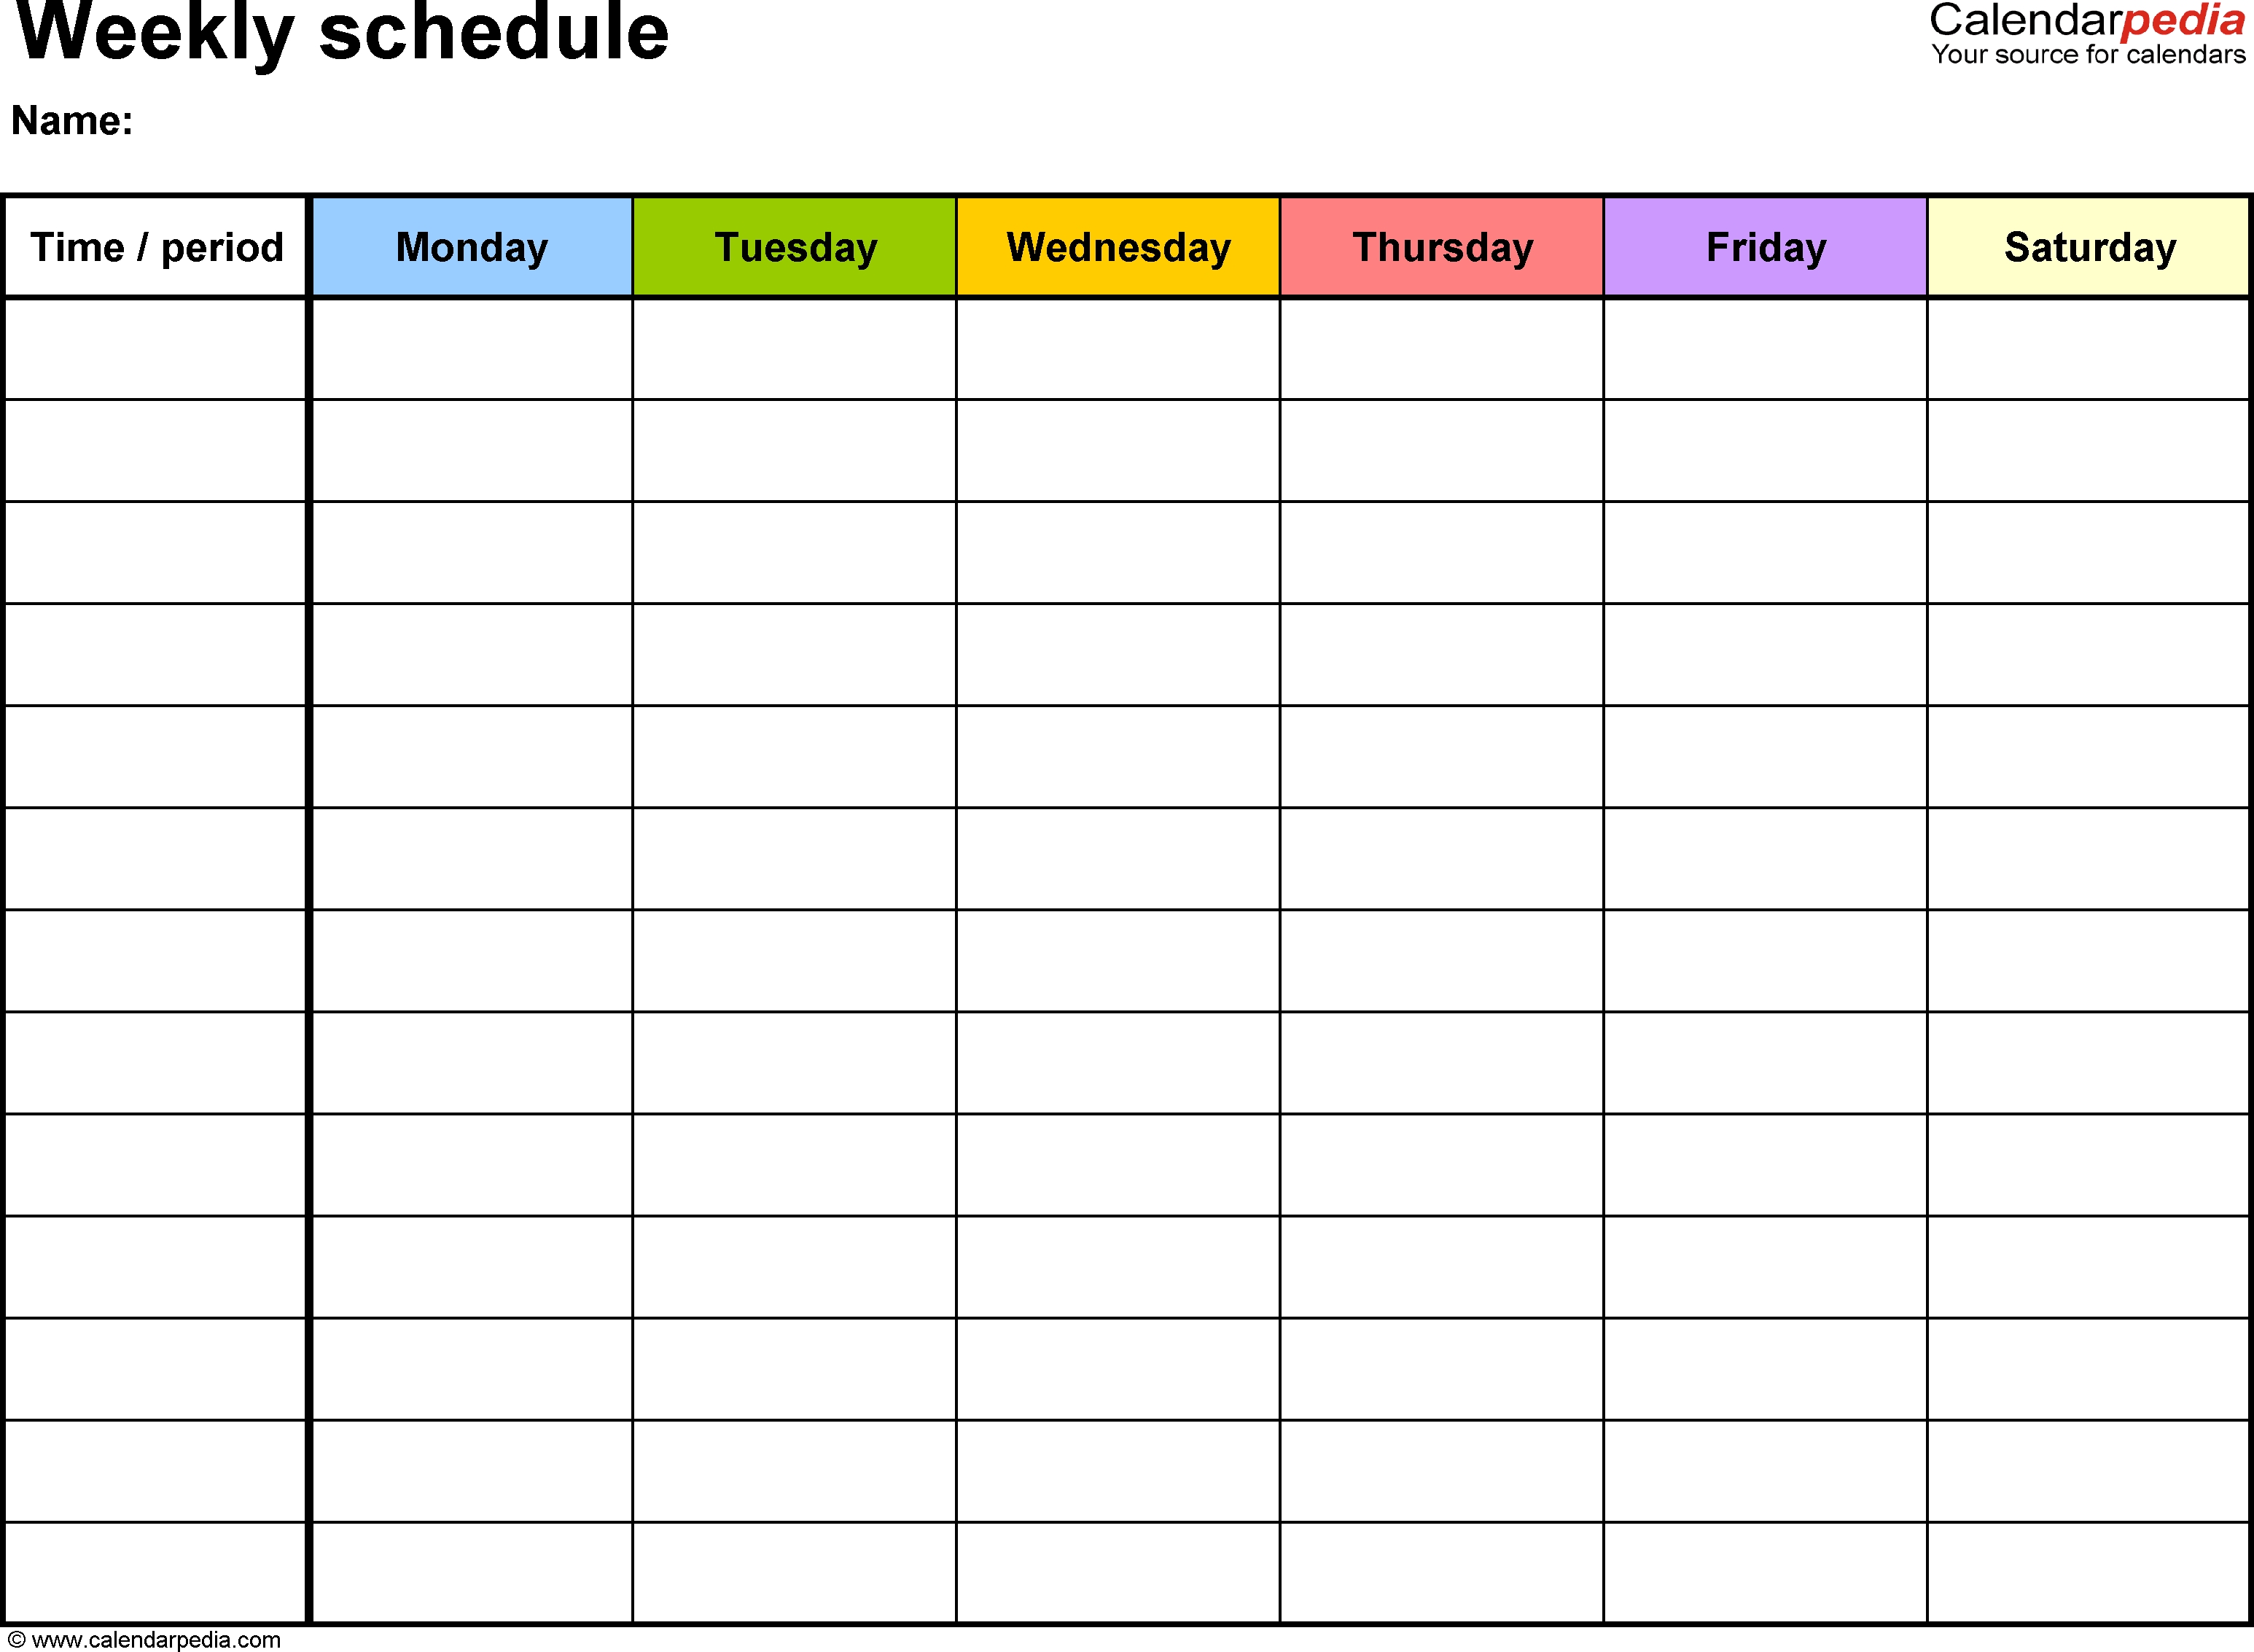 Free Weekly Schedule Templates For Word - 18 Templates-5 Day Blank Calendar